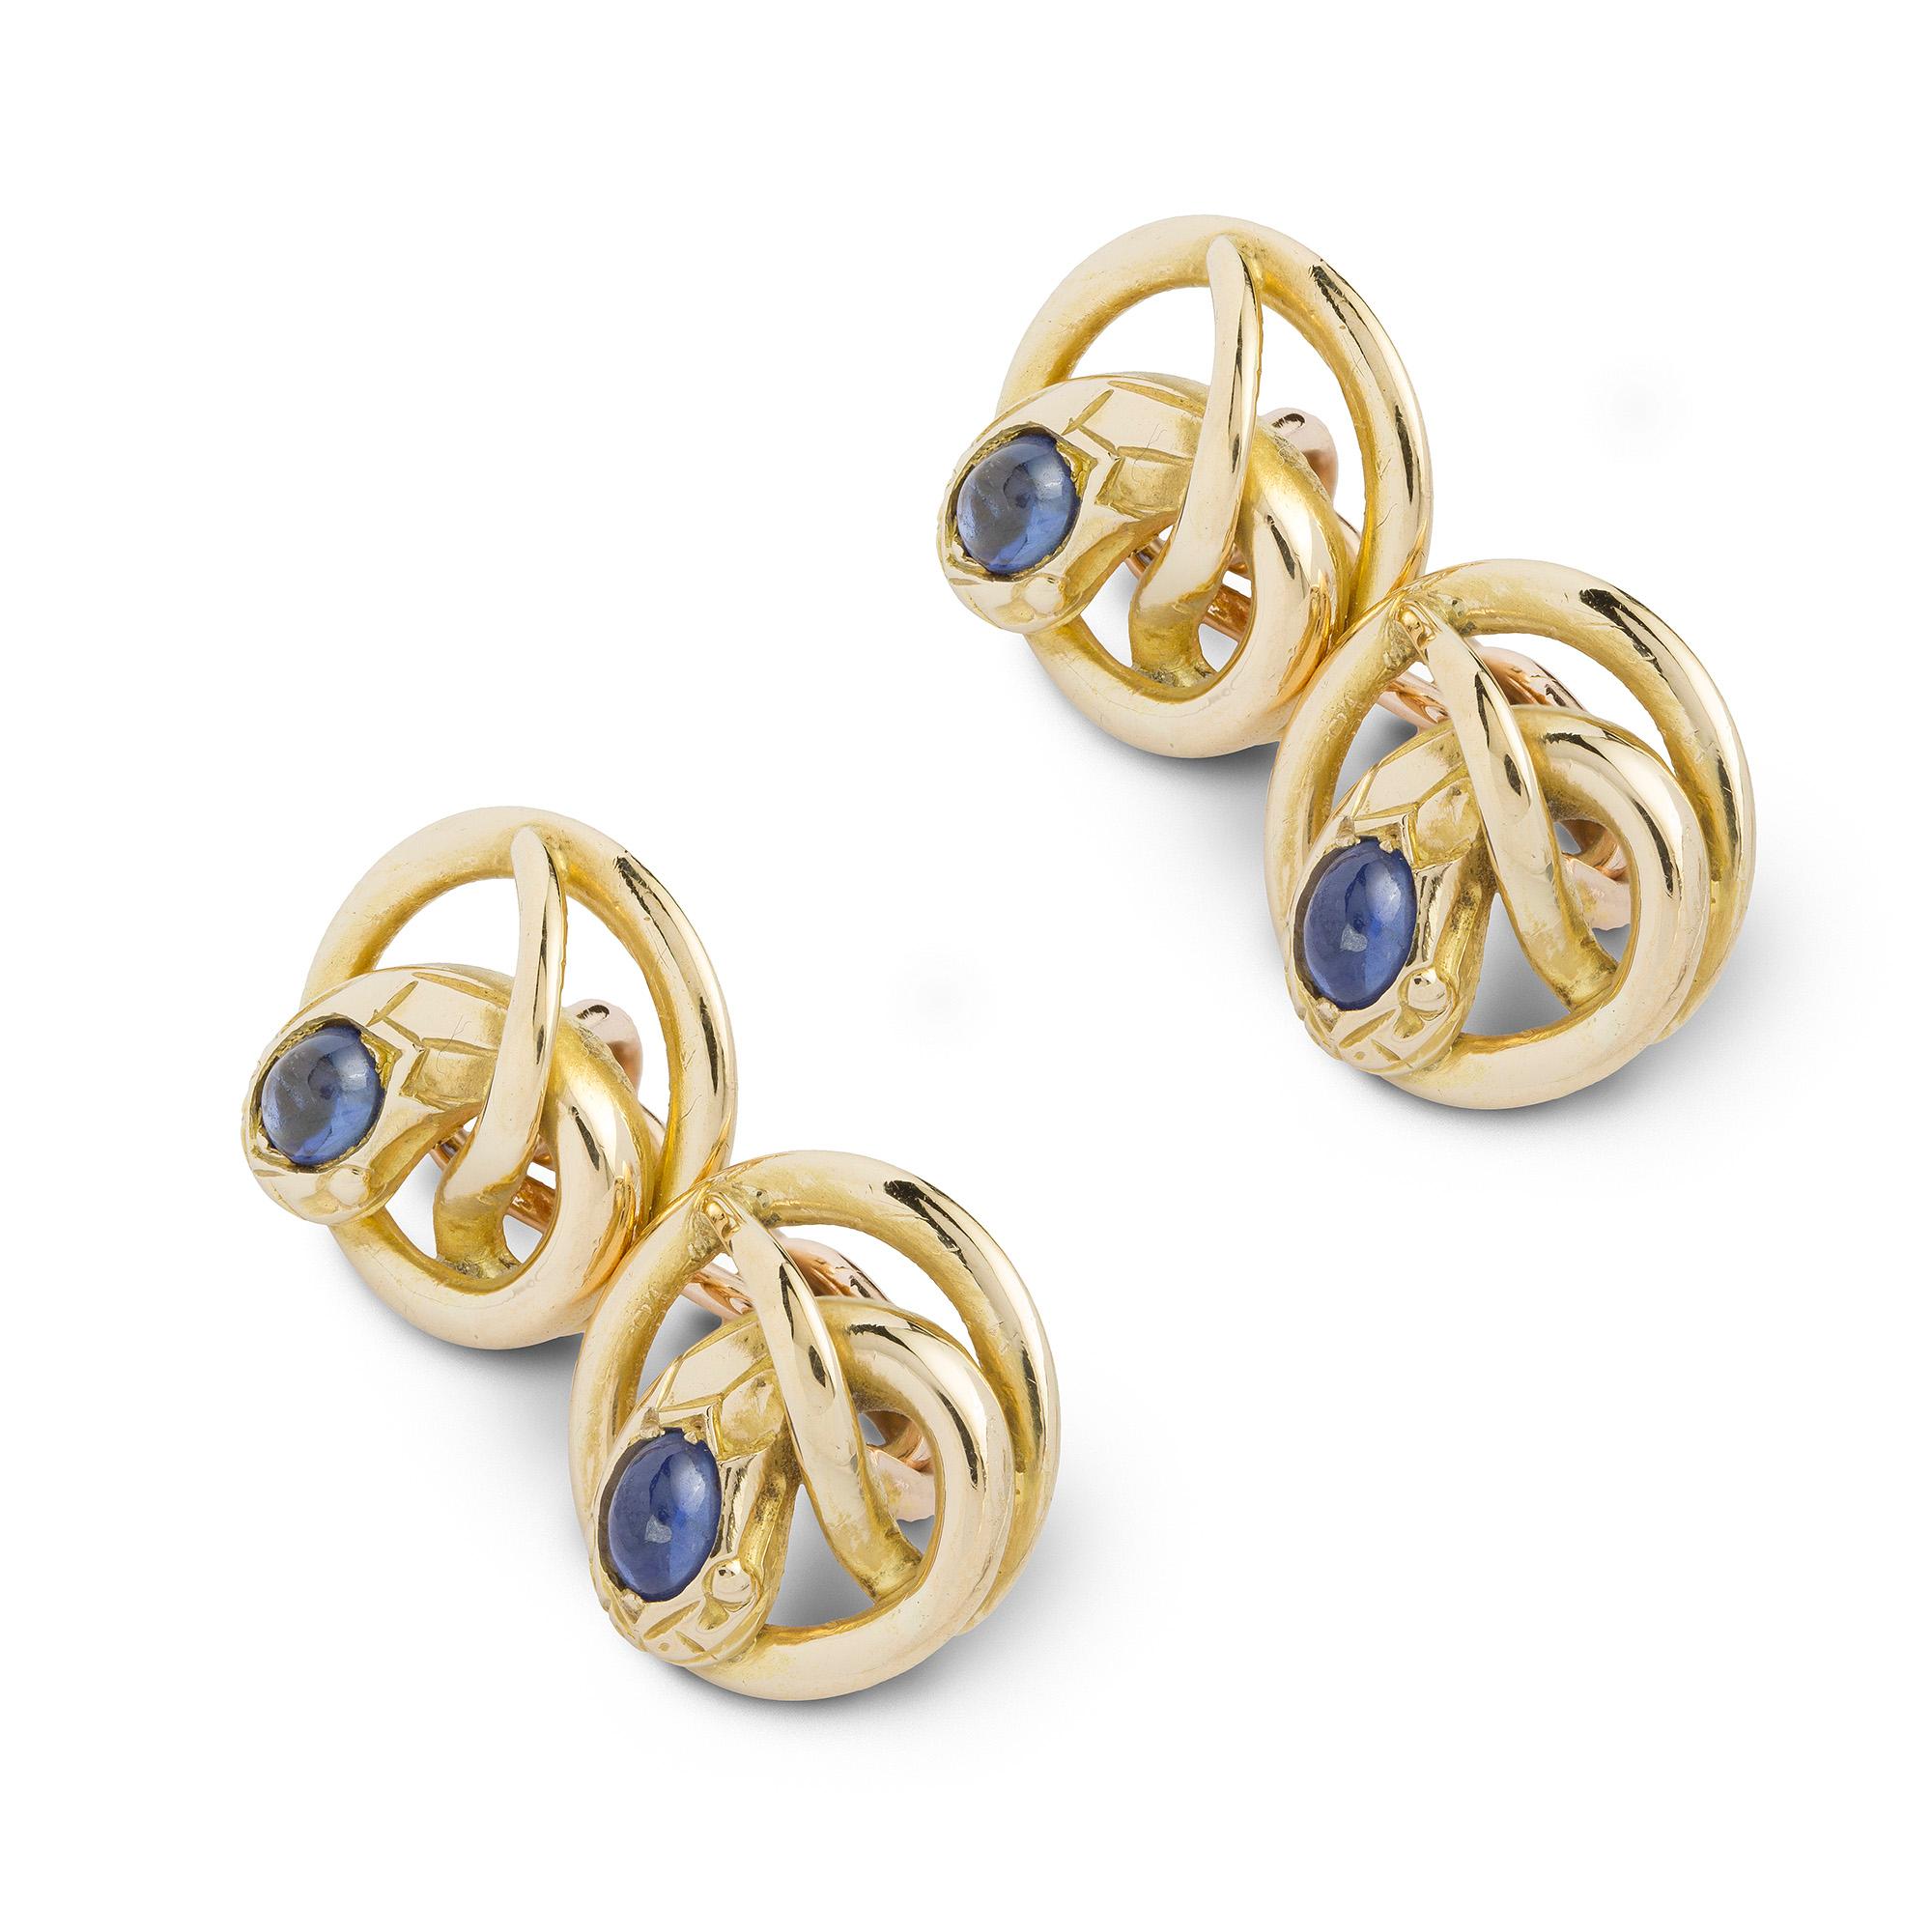 A Victorian gold and sapphire snake cufflinks, each link in the form of entwined serpent with cabochon-cut sapphire set head, linked together with gold chain, measuring approximately 1.3cm in diameter, circa 1890, gross weight 12.1 grams.

This